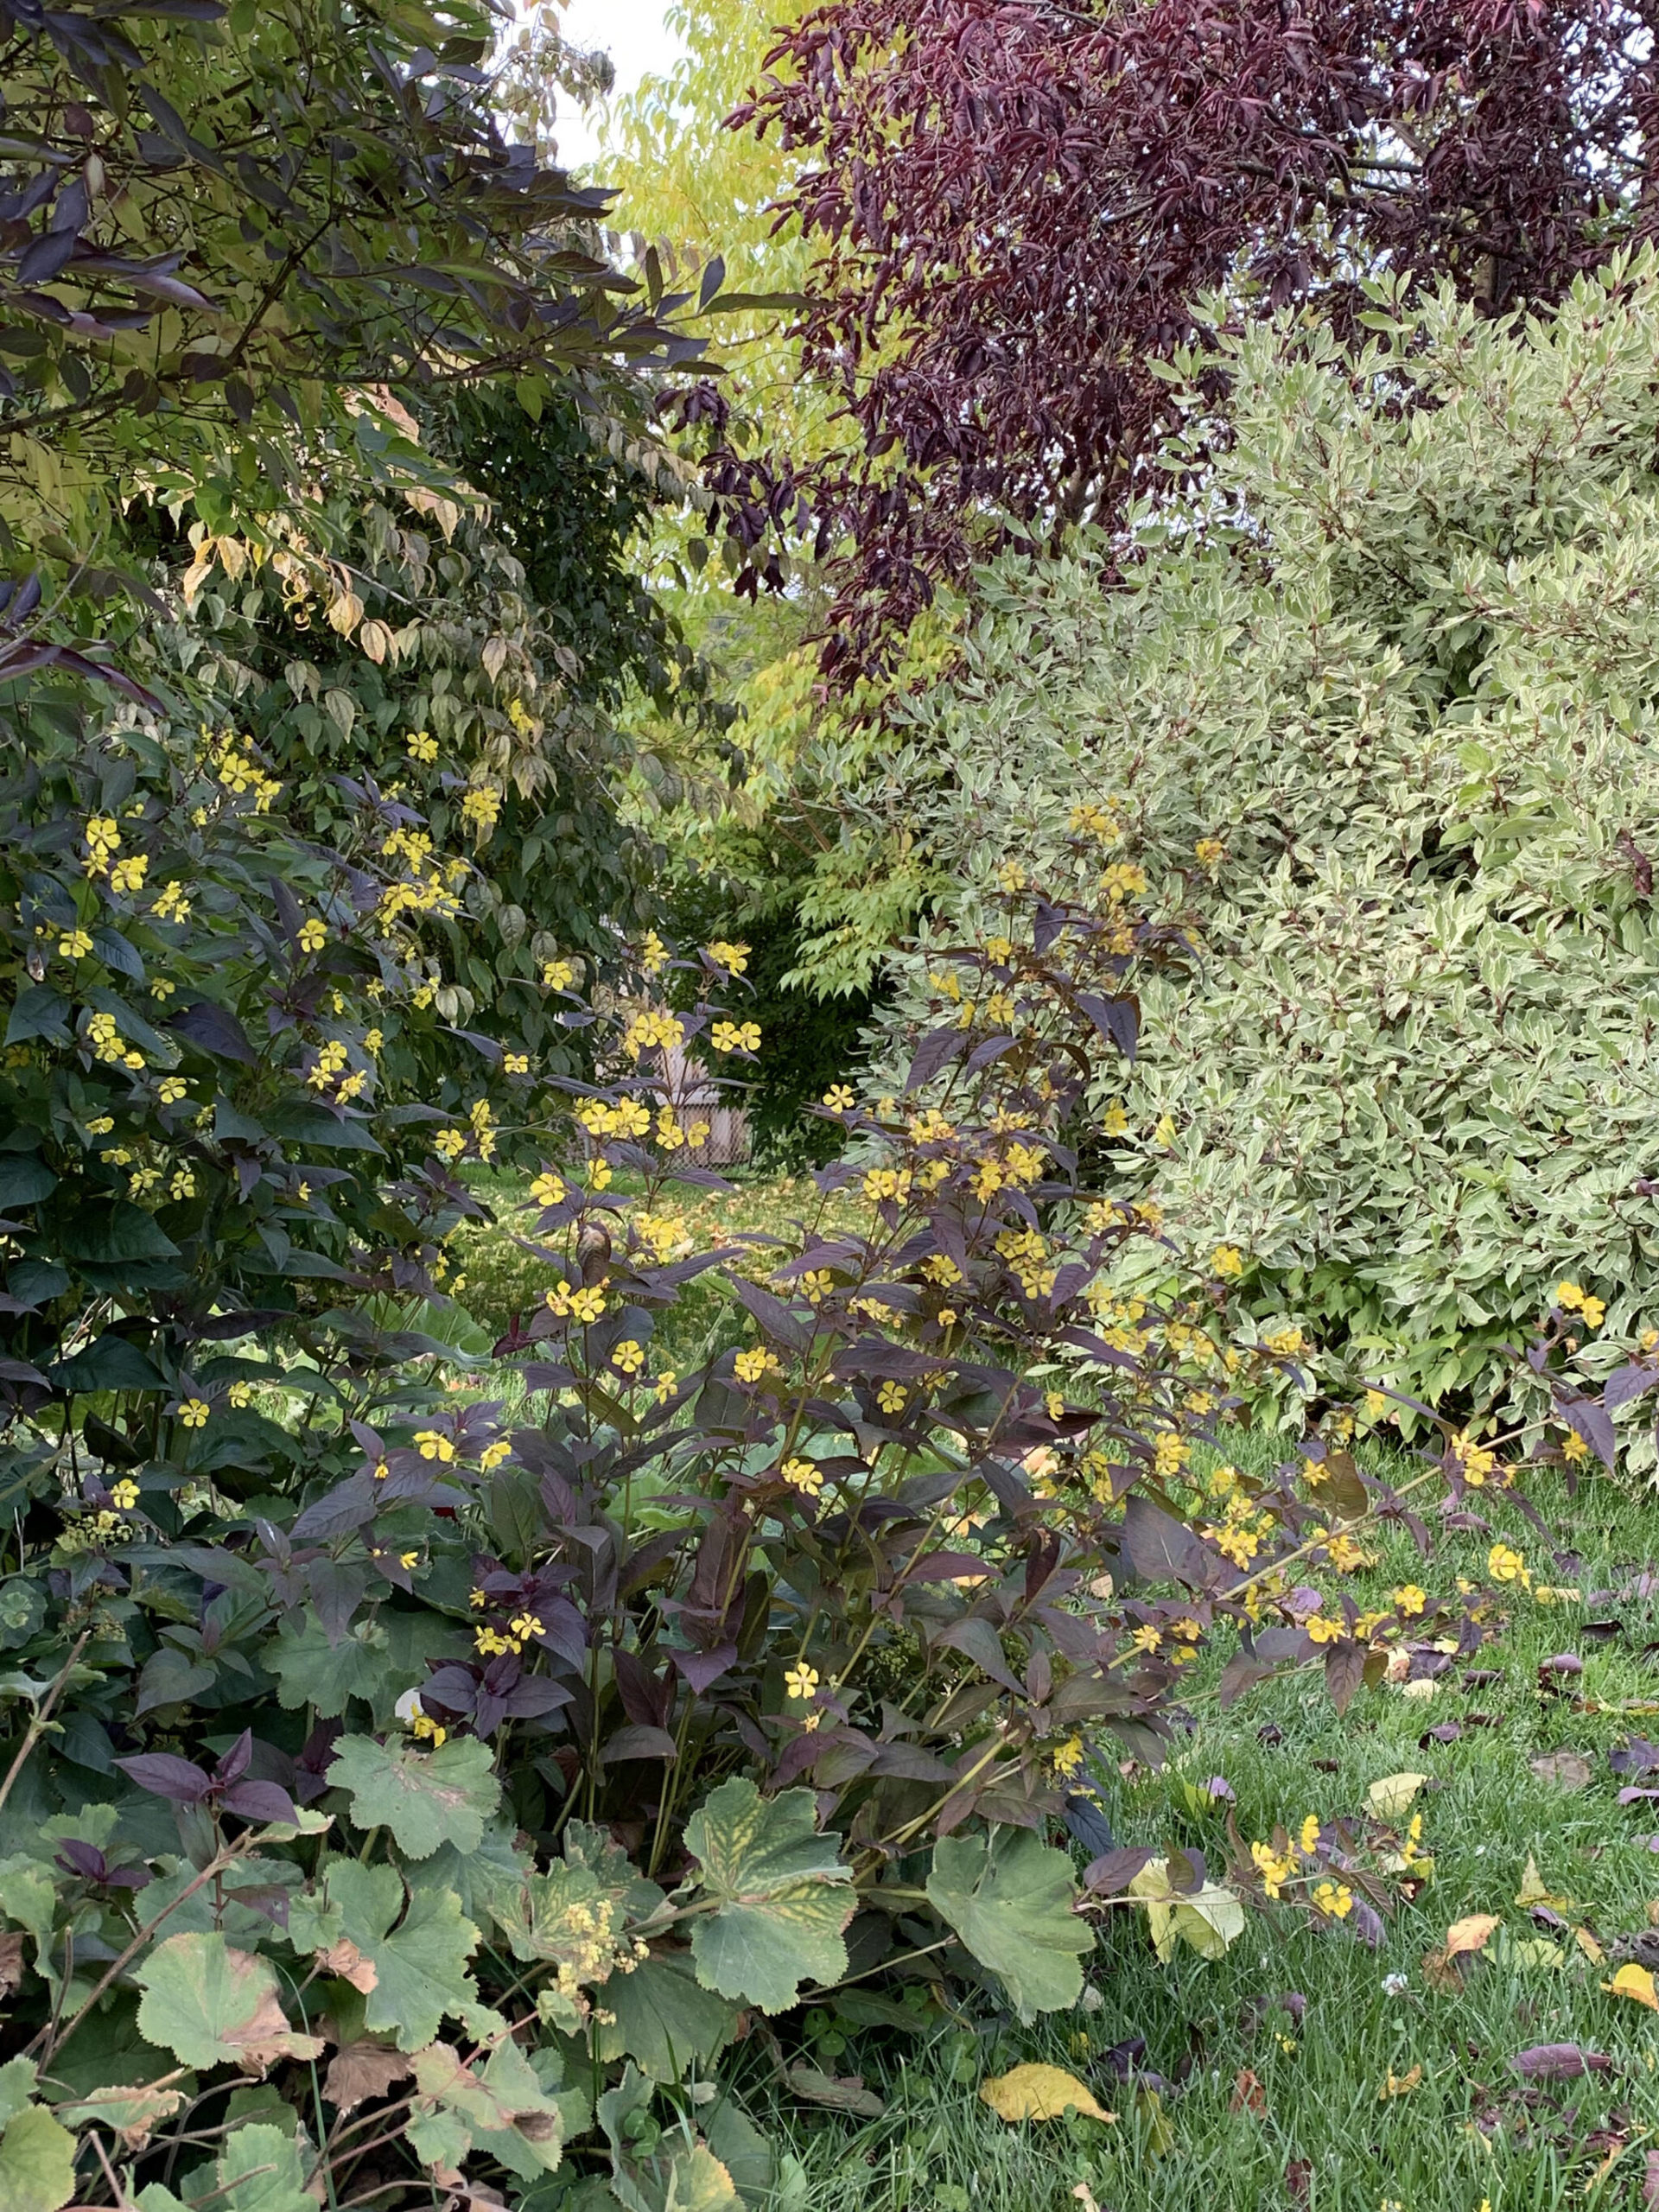 Lysimachia purpurea’s yellow blooms glimmer in the fall light. (Photo by Rosemary Fitzpatrick)